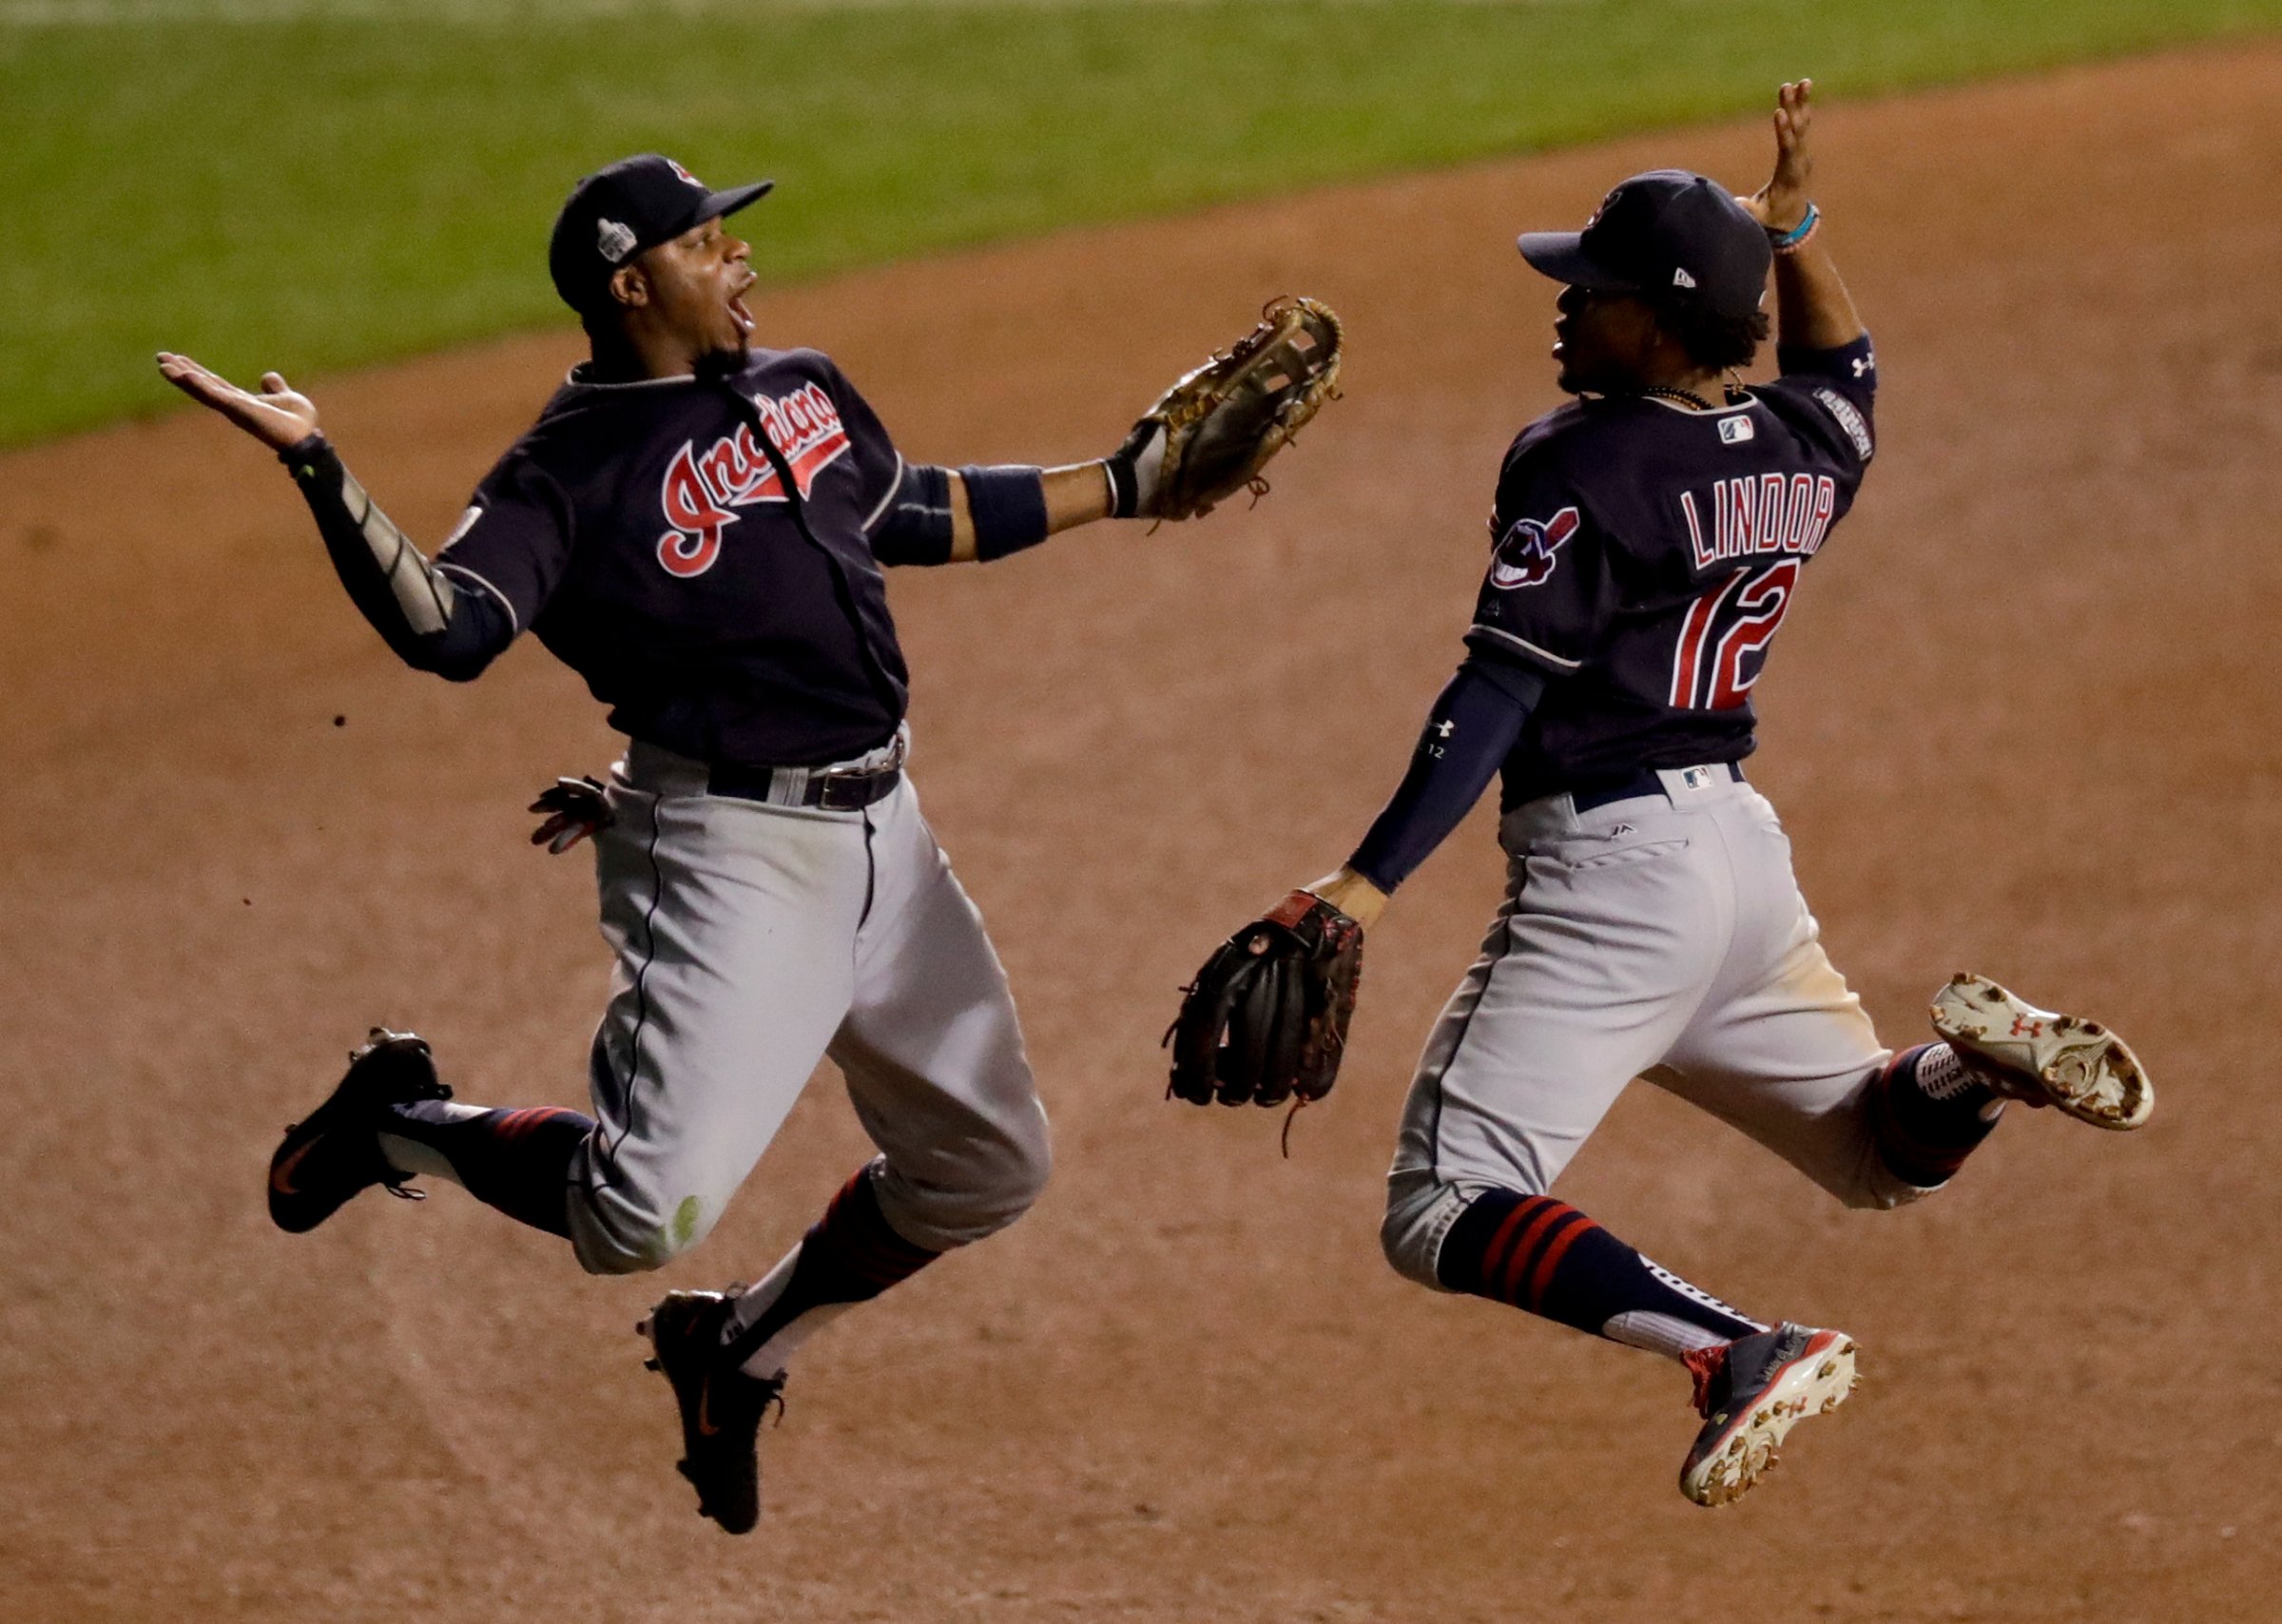 Cleveland Indians left fielder Rajai Davis, left, and shortstop Francisco Lindor celebrate their win after Game 4 of the Major League Baseball World Series against the Chicago Cubs Saturday, Oct. 29, 2016, in Chicago. The Indians won 7-2 to take a 3-1 lead in the series. (AP Photo/Charles Rex Arbogast)